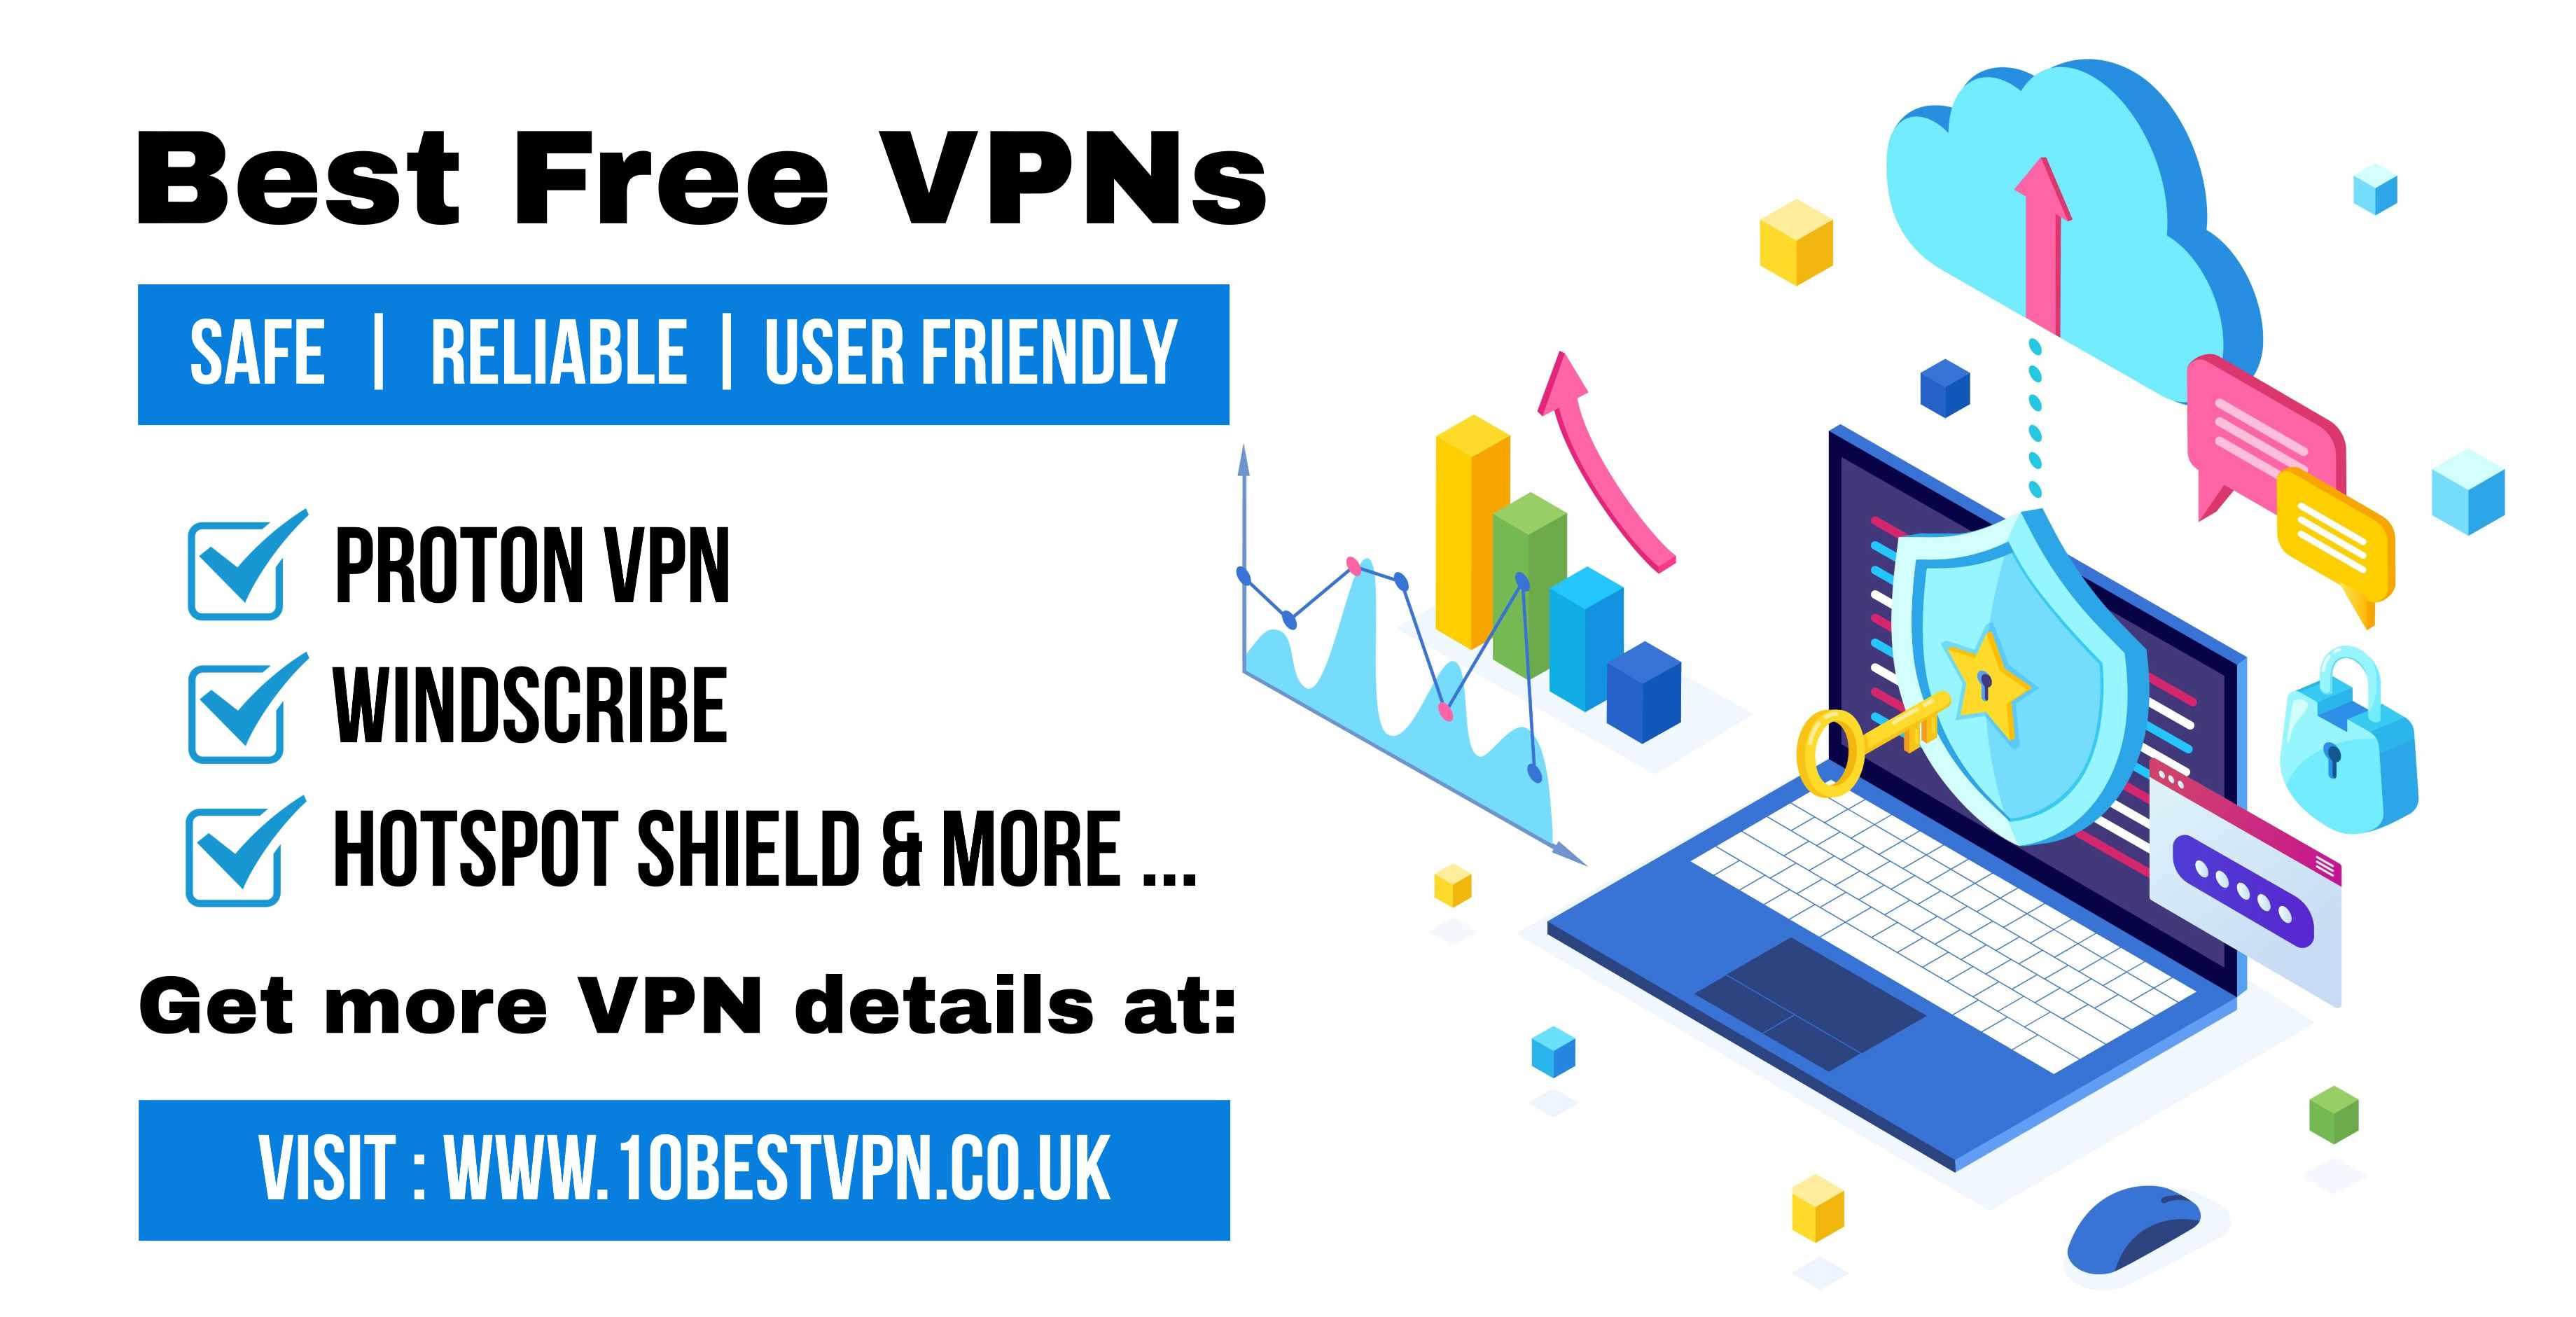 Image - Internet world is full of #FreeVPNforPC that every VPN is not safe. Most of #FreeVPNs are pirated and use of ...